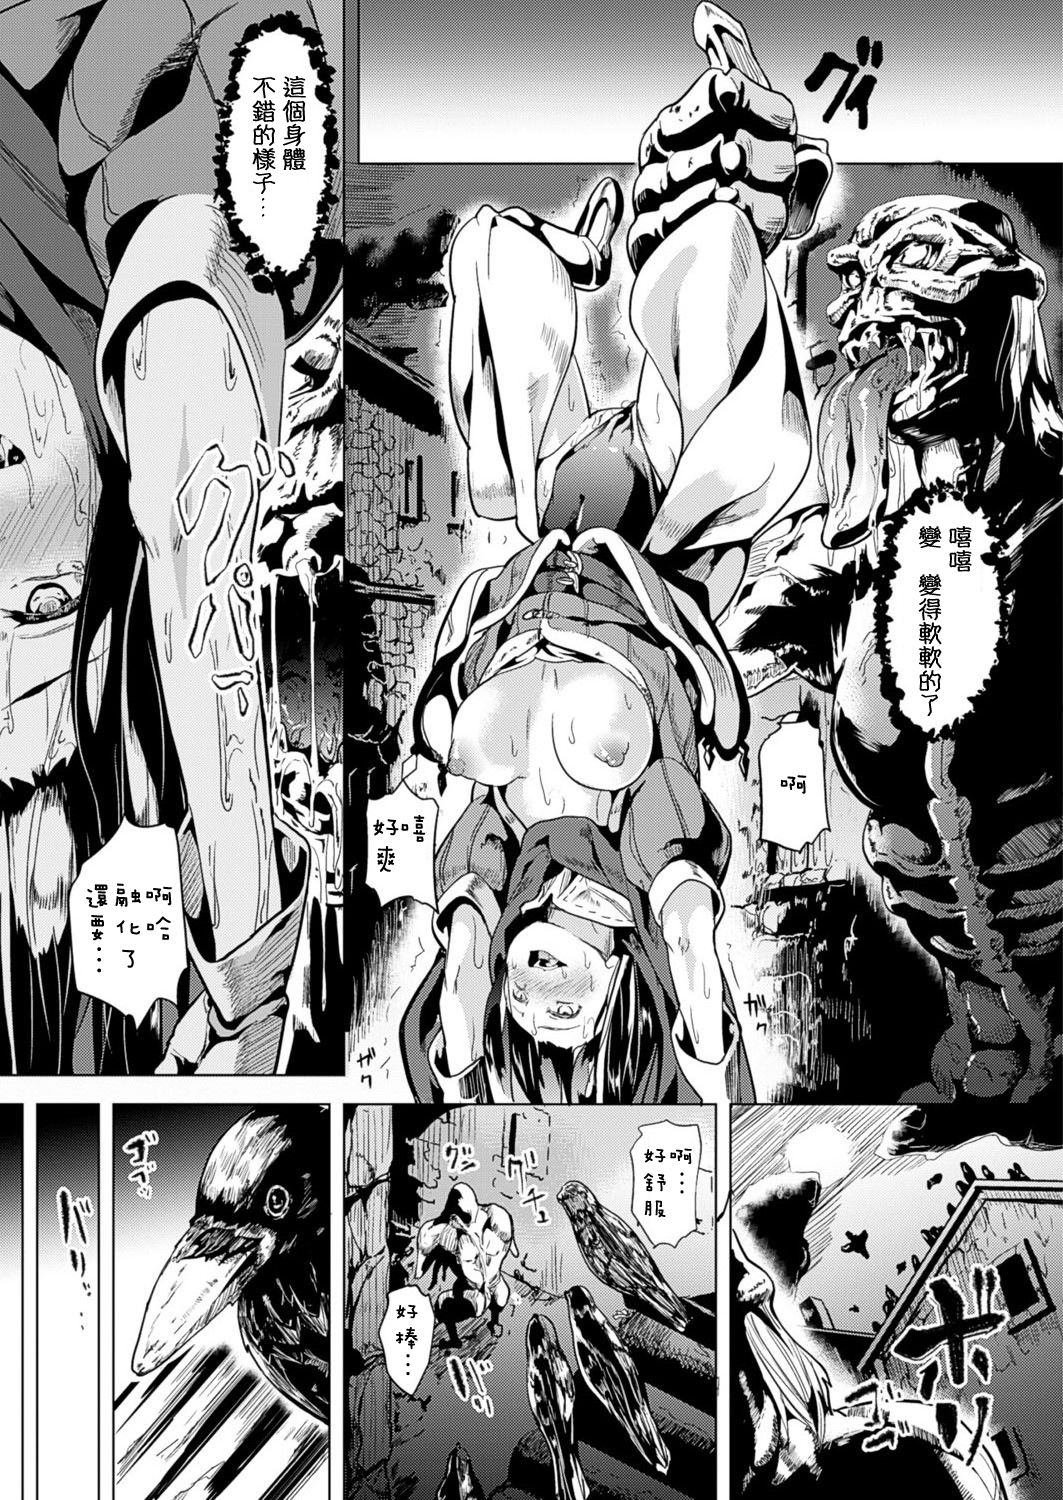 [DATE] OGRE #2 (COMIC Unreal 2016-12 Vol. 64) [Chinese] [風過迴廊個人漢化] [Digital] page 11 full